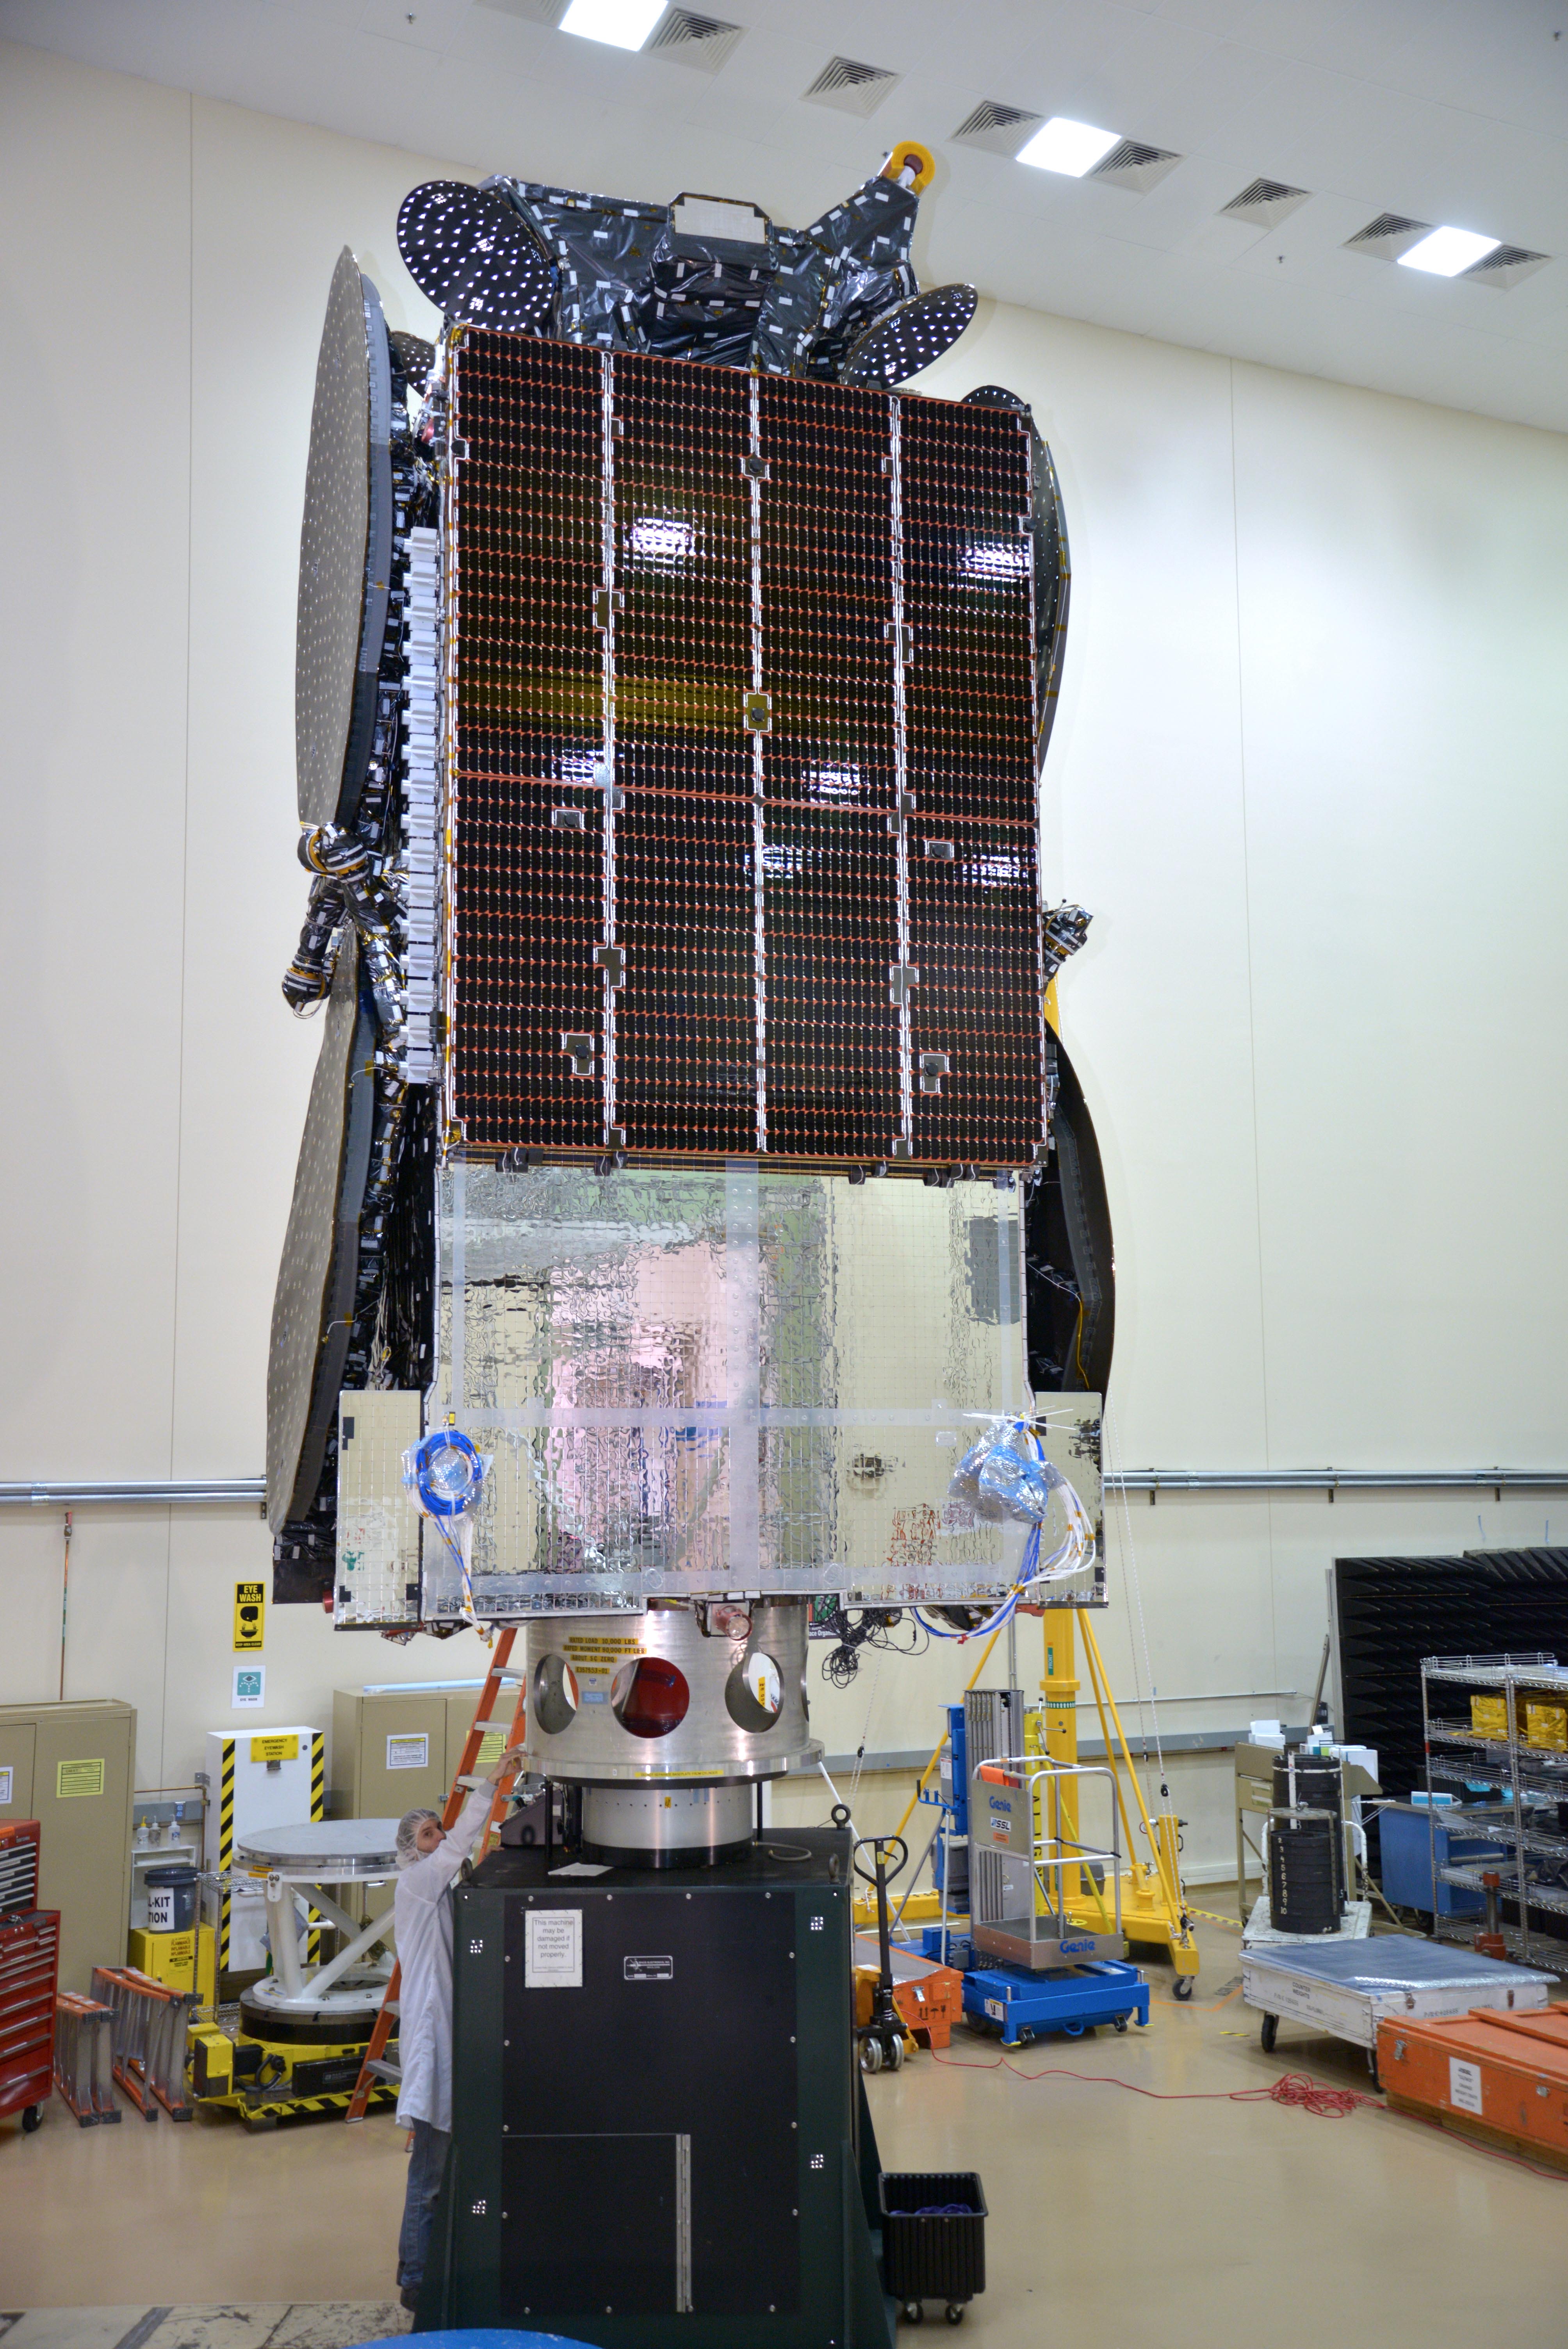 The Star One C4 satellite built by SSL is now at launch base